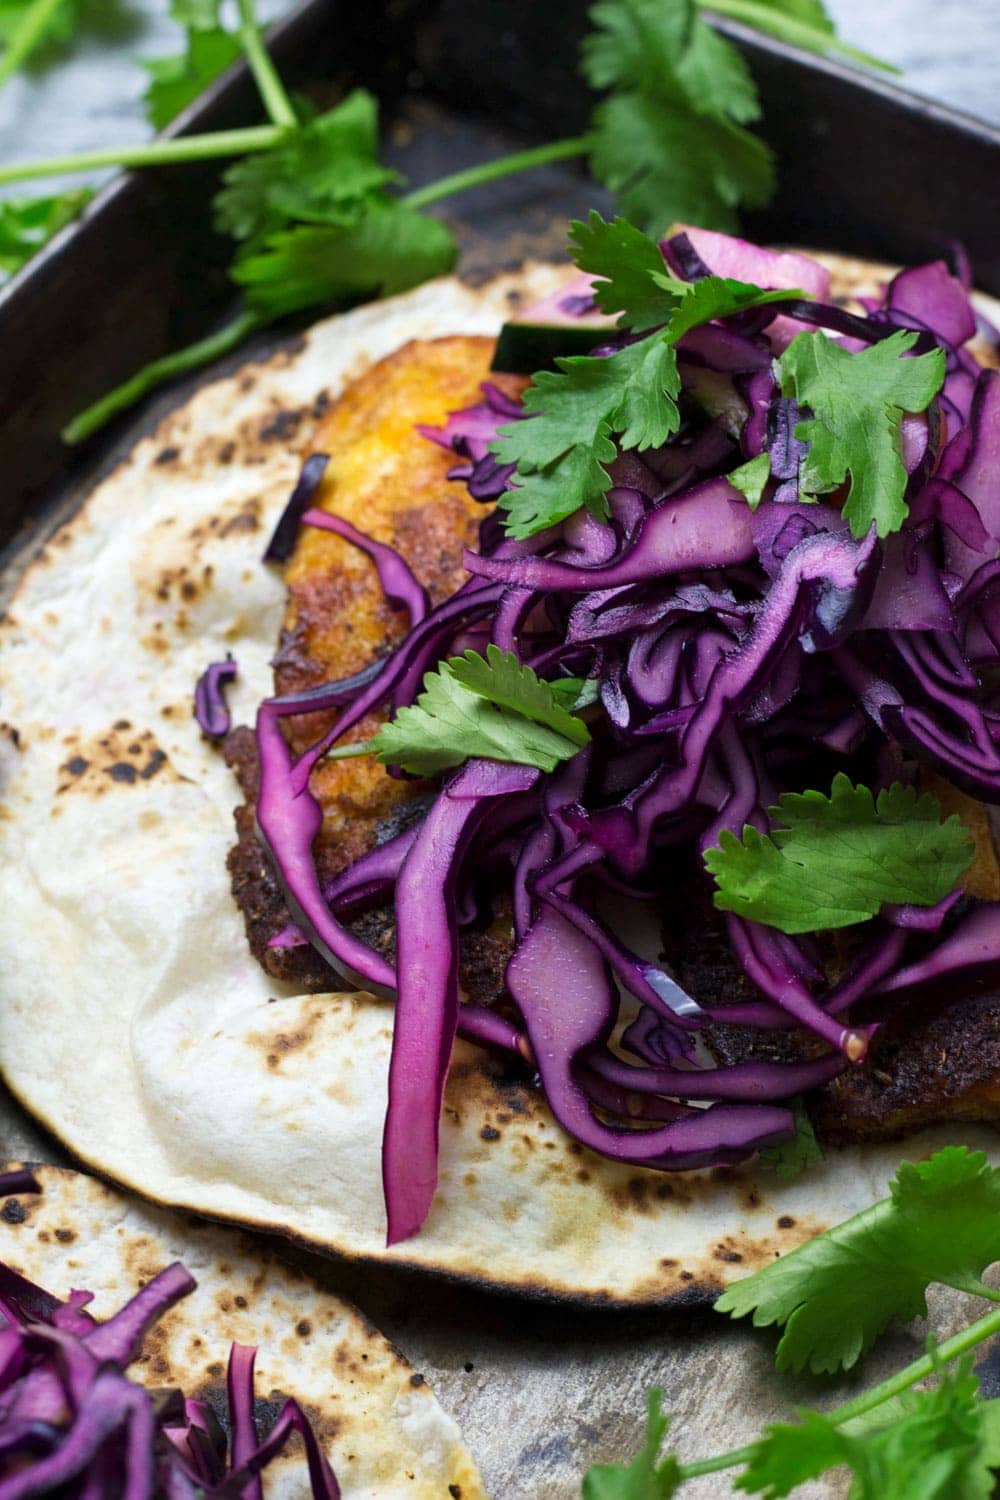 These halloumi tacos are beautifully spiced and topped with a fresh and healthy cabbage slaw. An ideal vegetarian Mexican dinner!